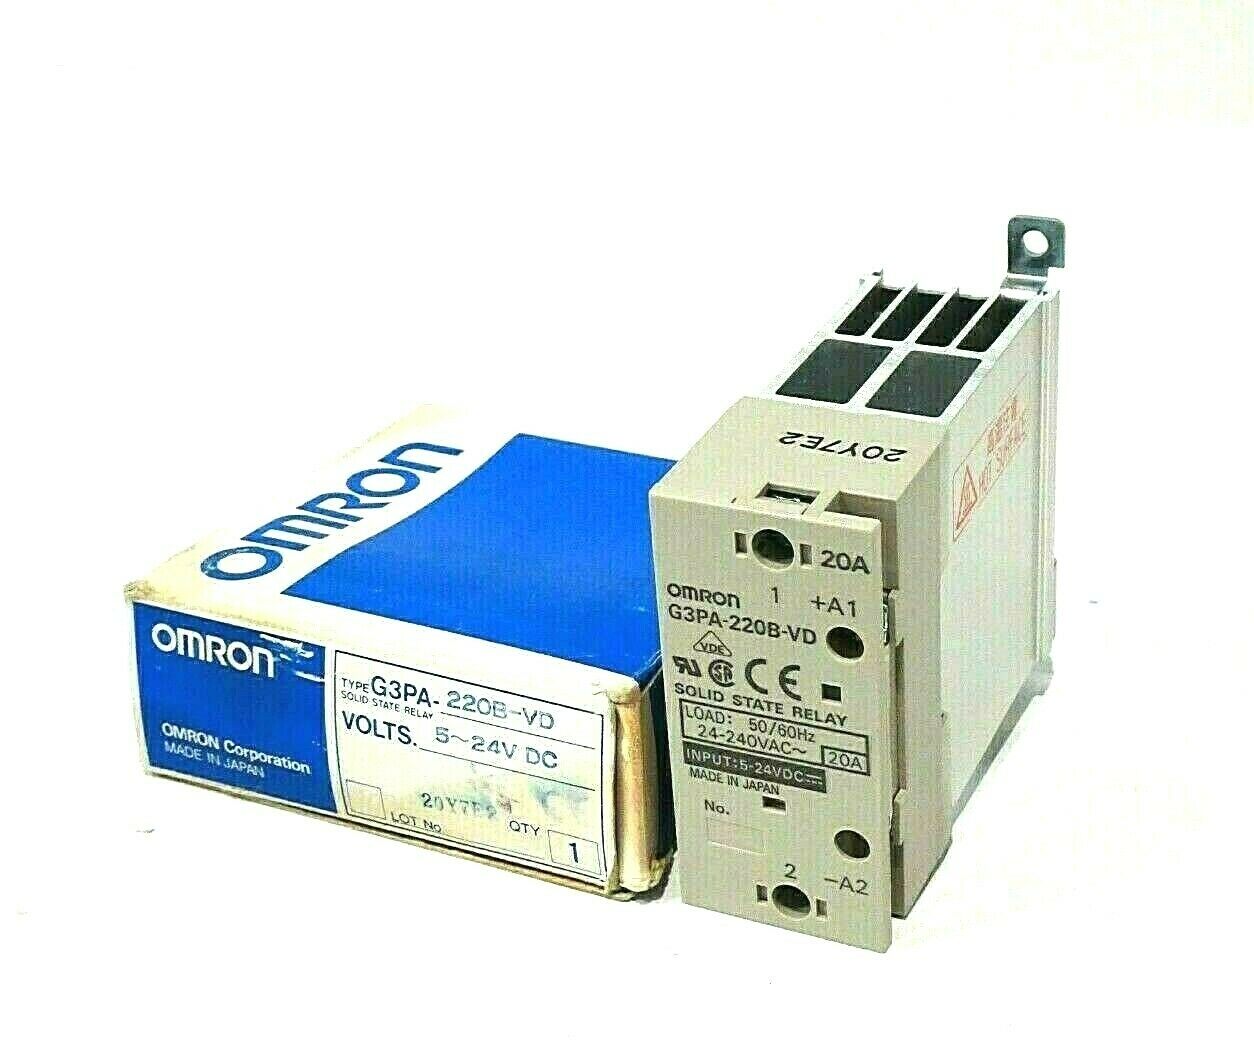 OMRON G3PA-220B-VD 20 AMP SOLID STATE RELAY